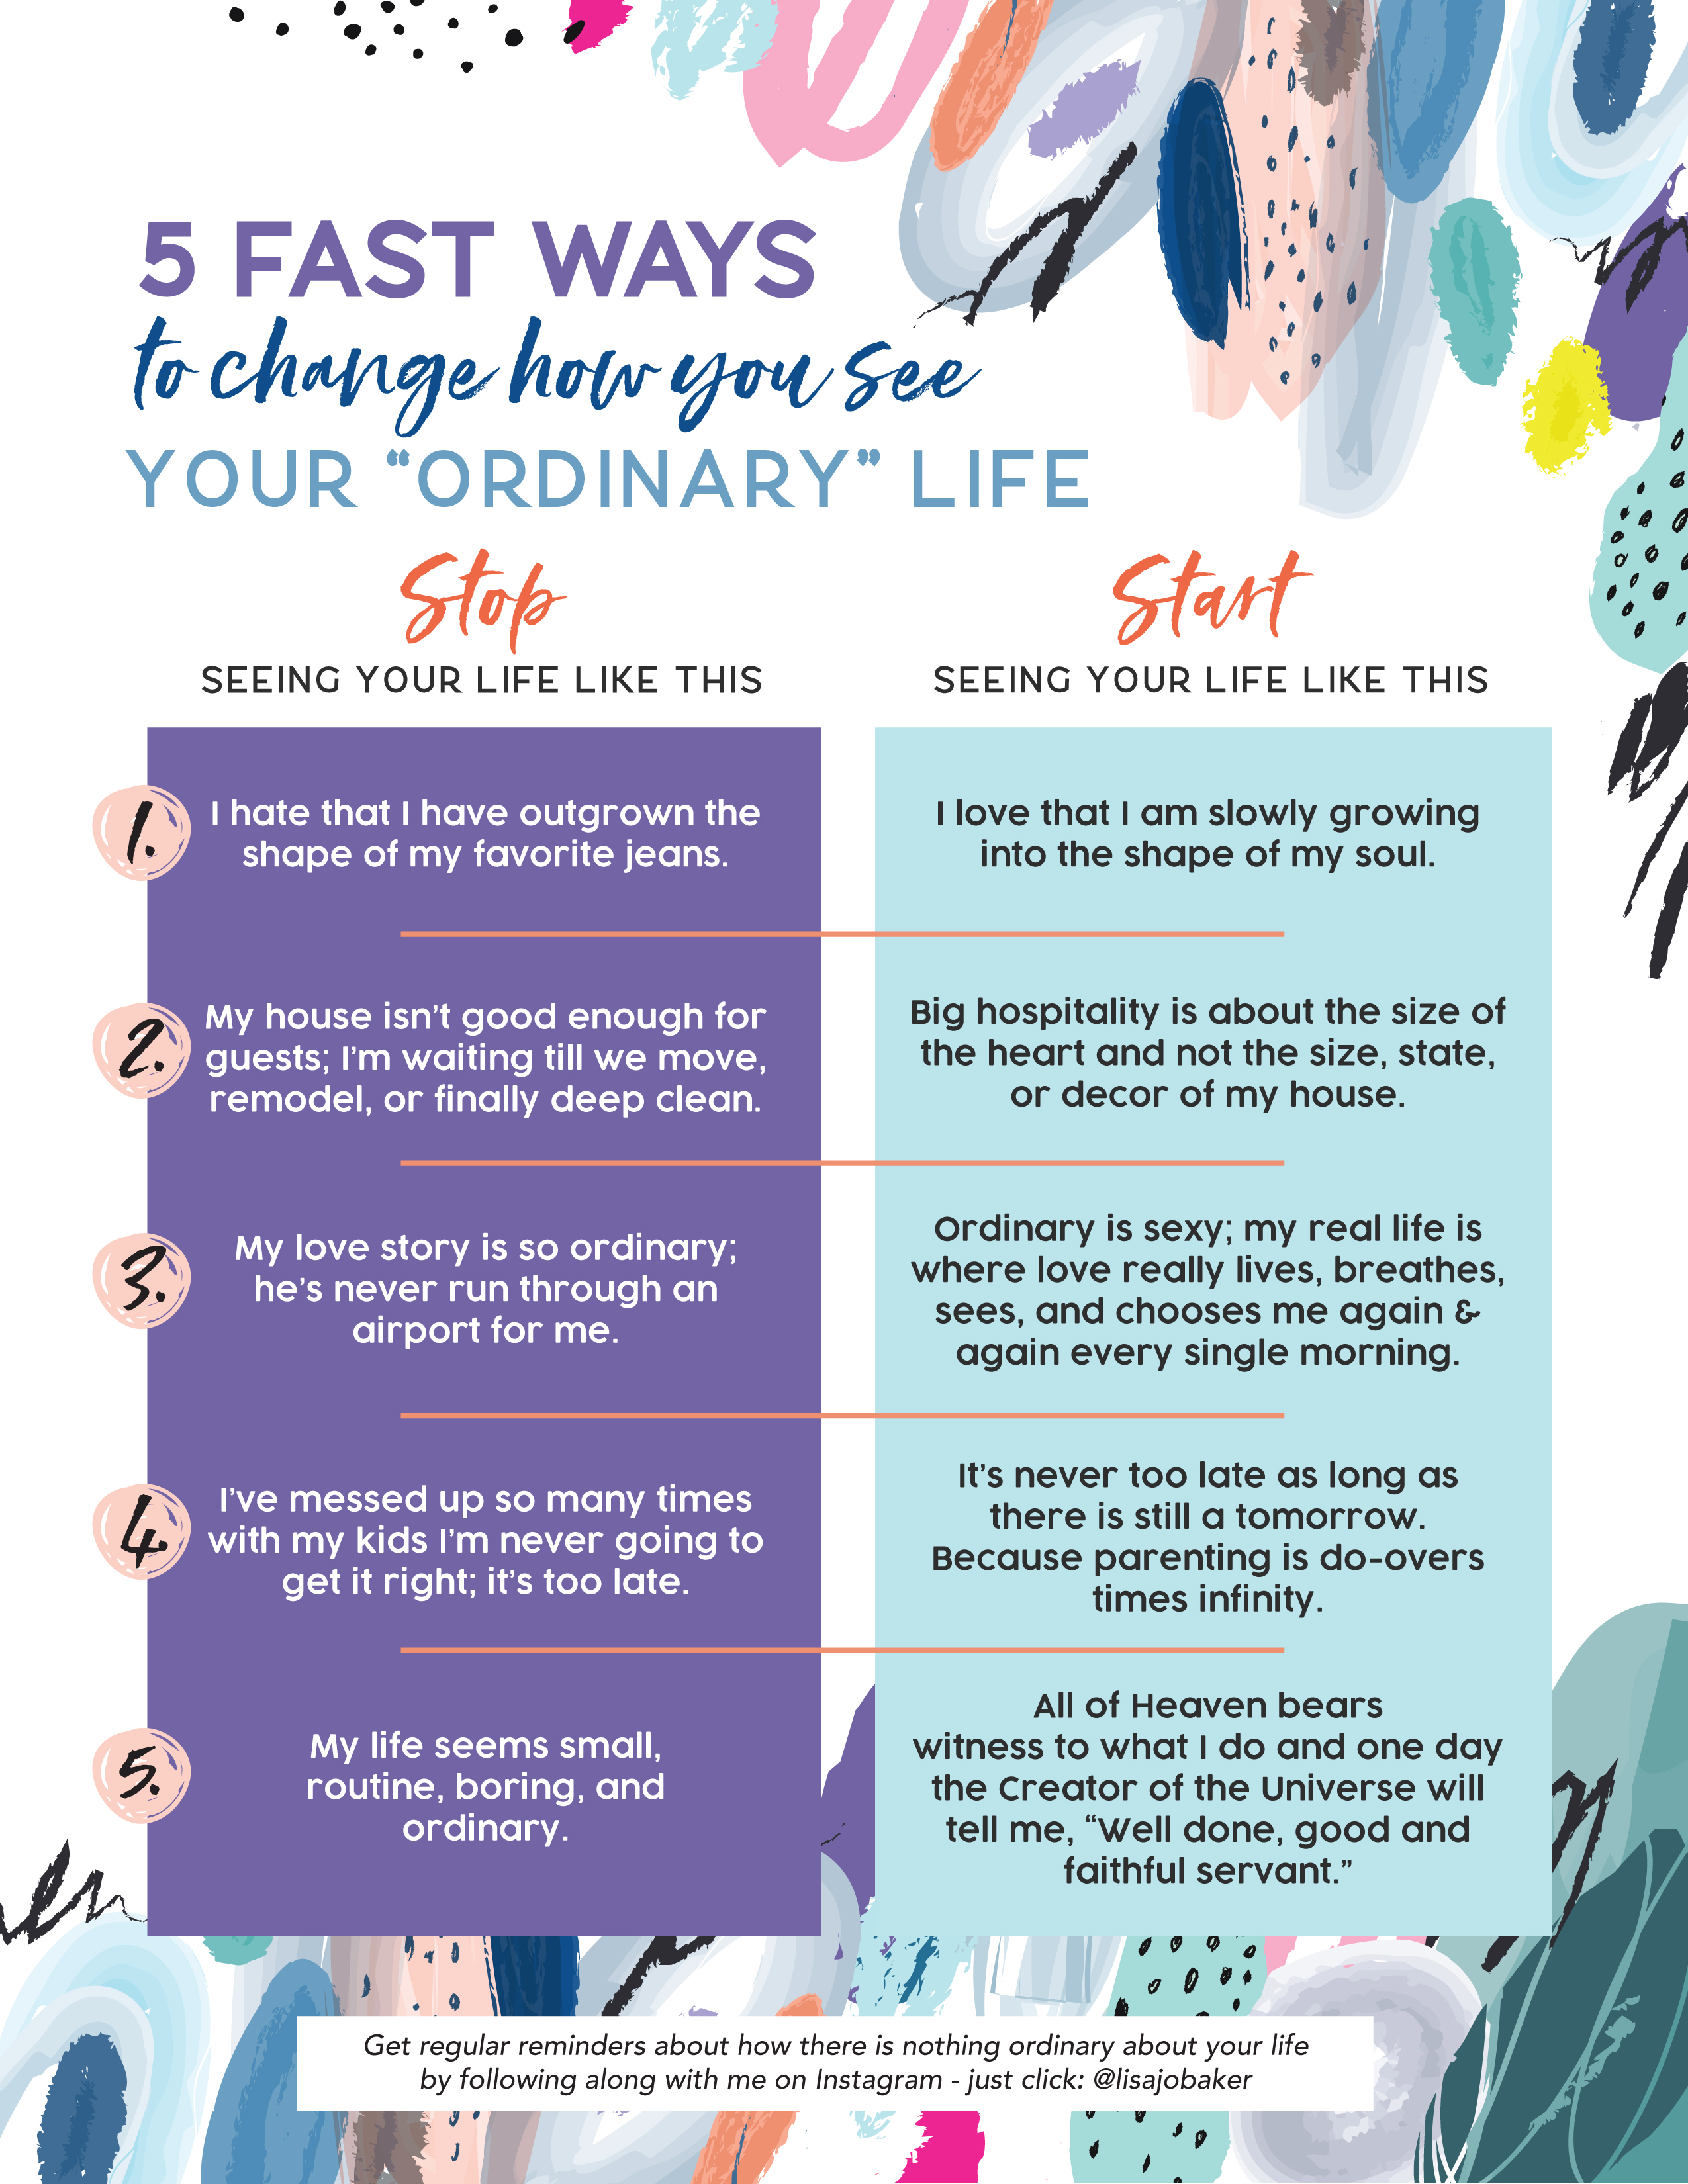 5 Fast Ways to Change How You See Your “Ordinary” Life (purple)